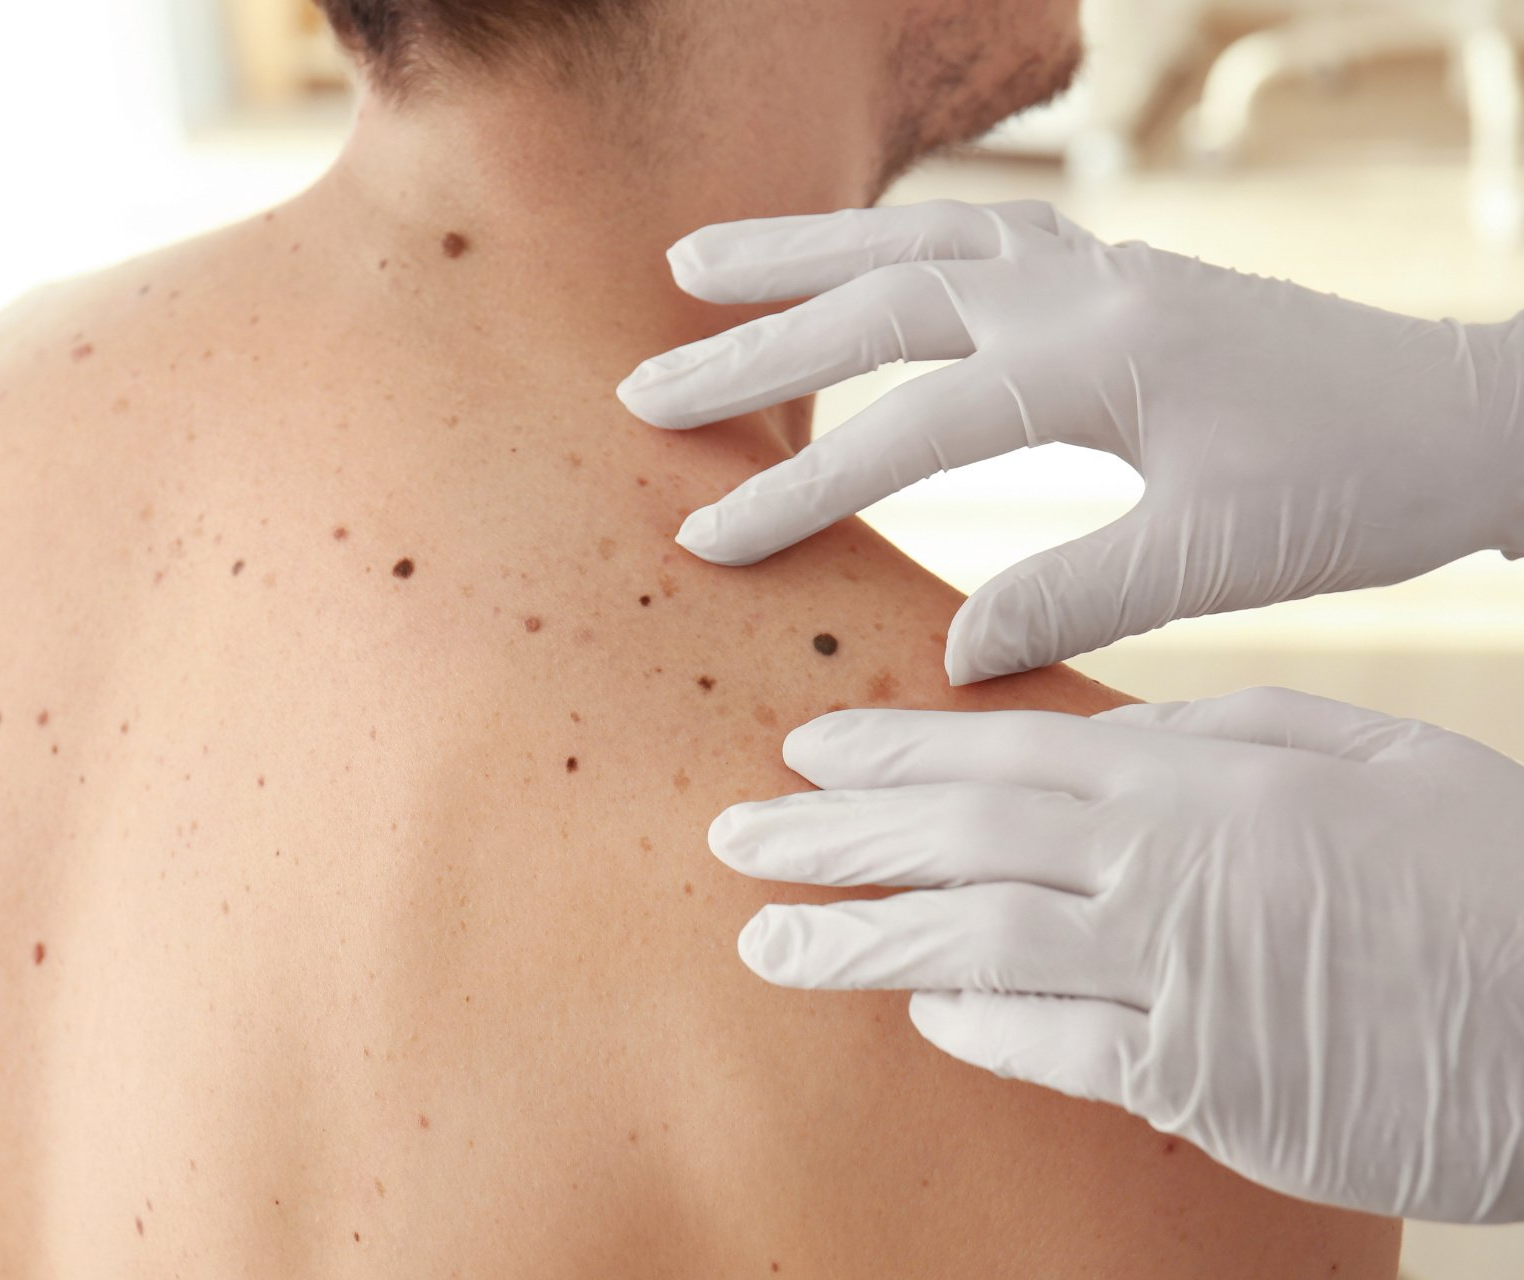 doctor examines moles on male patient's back